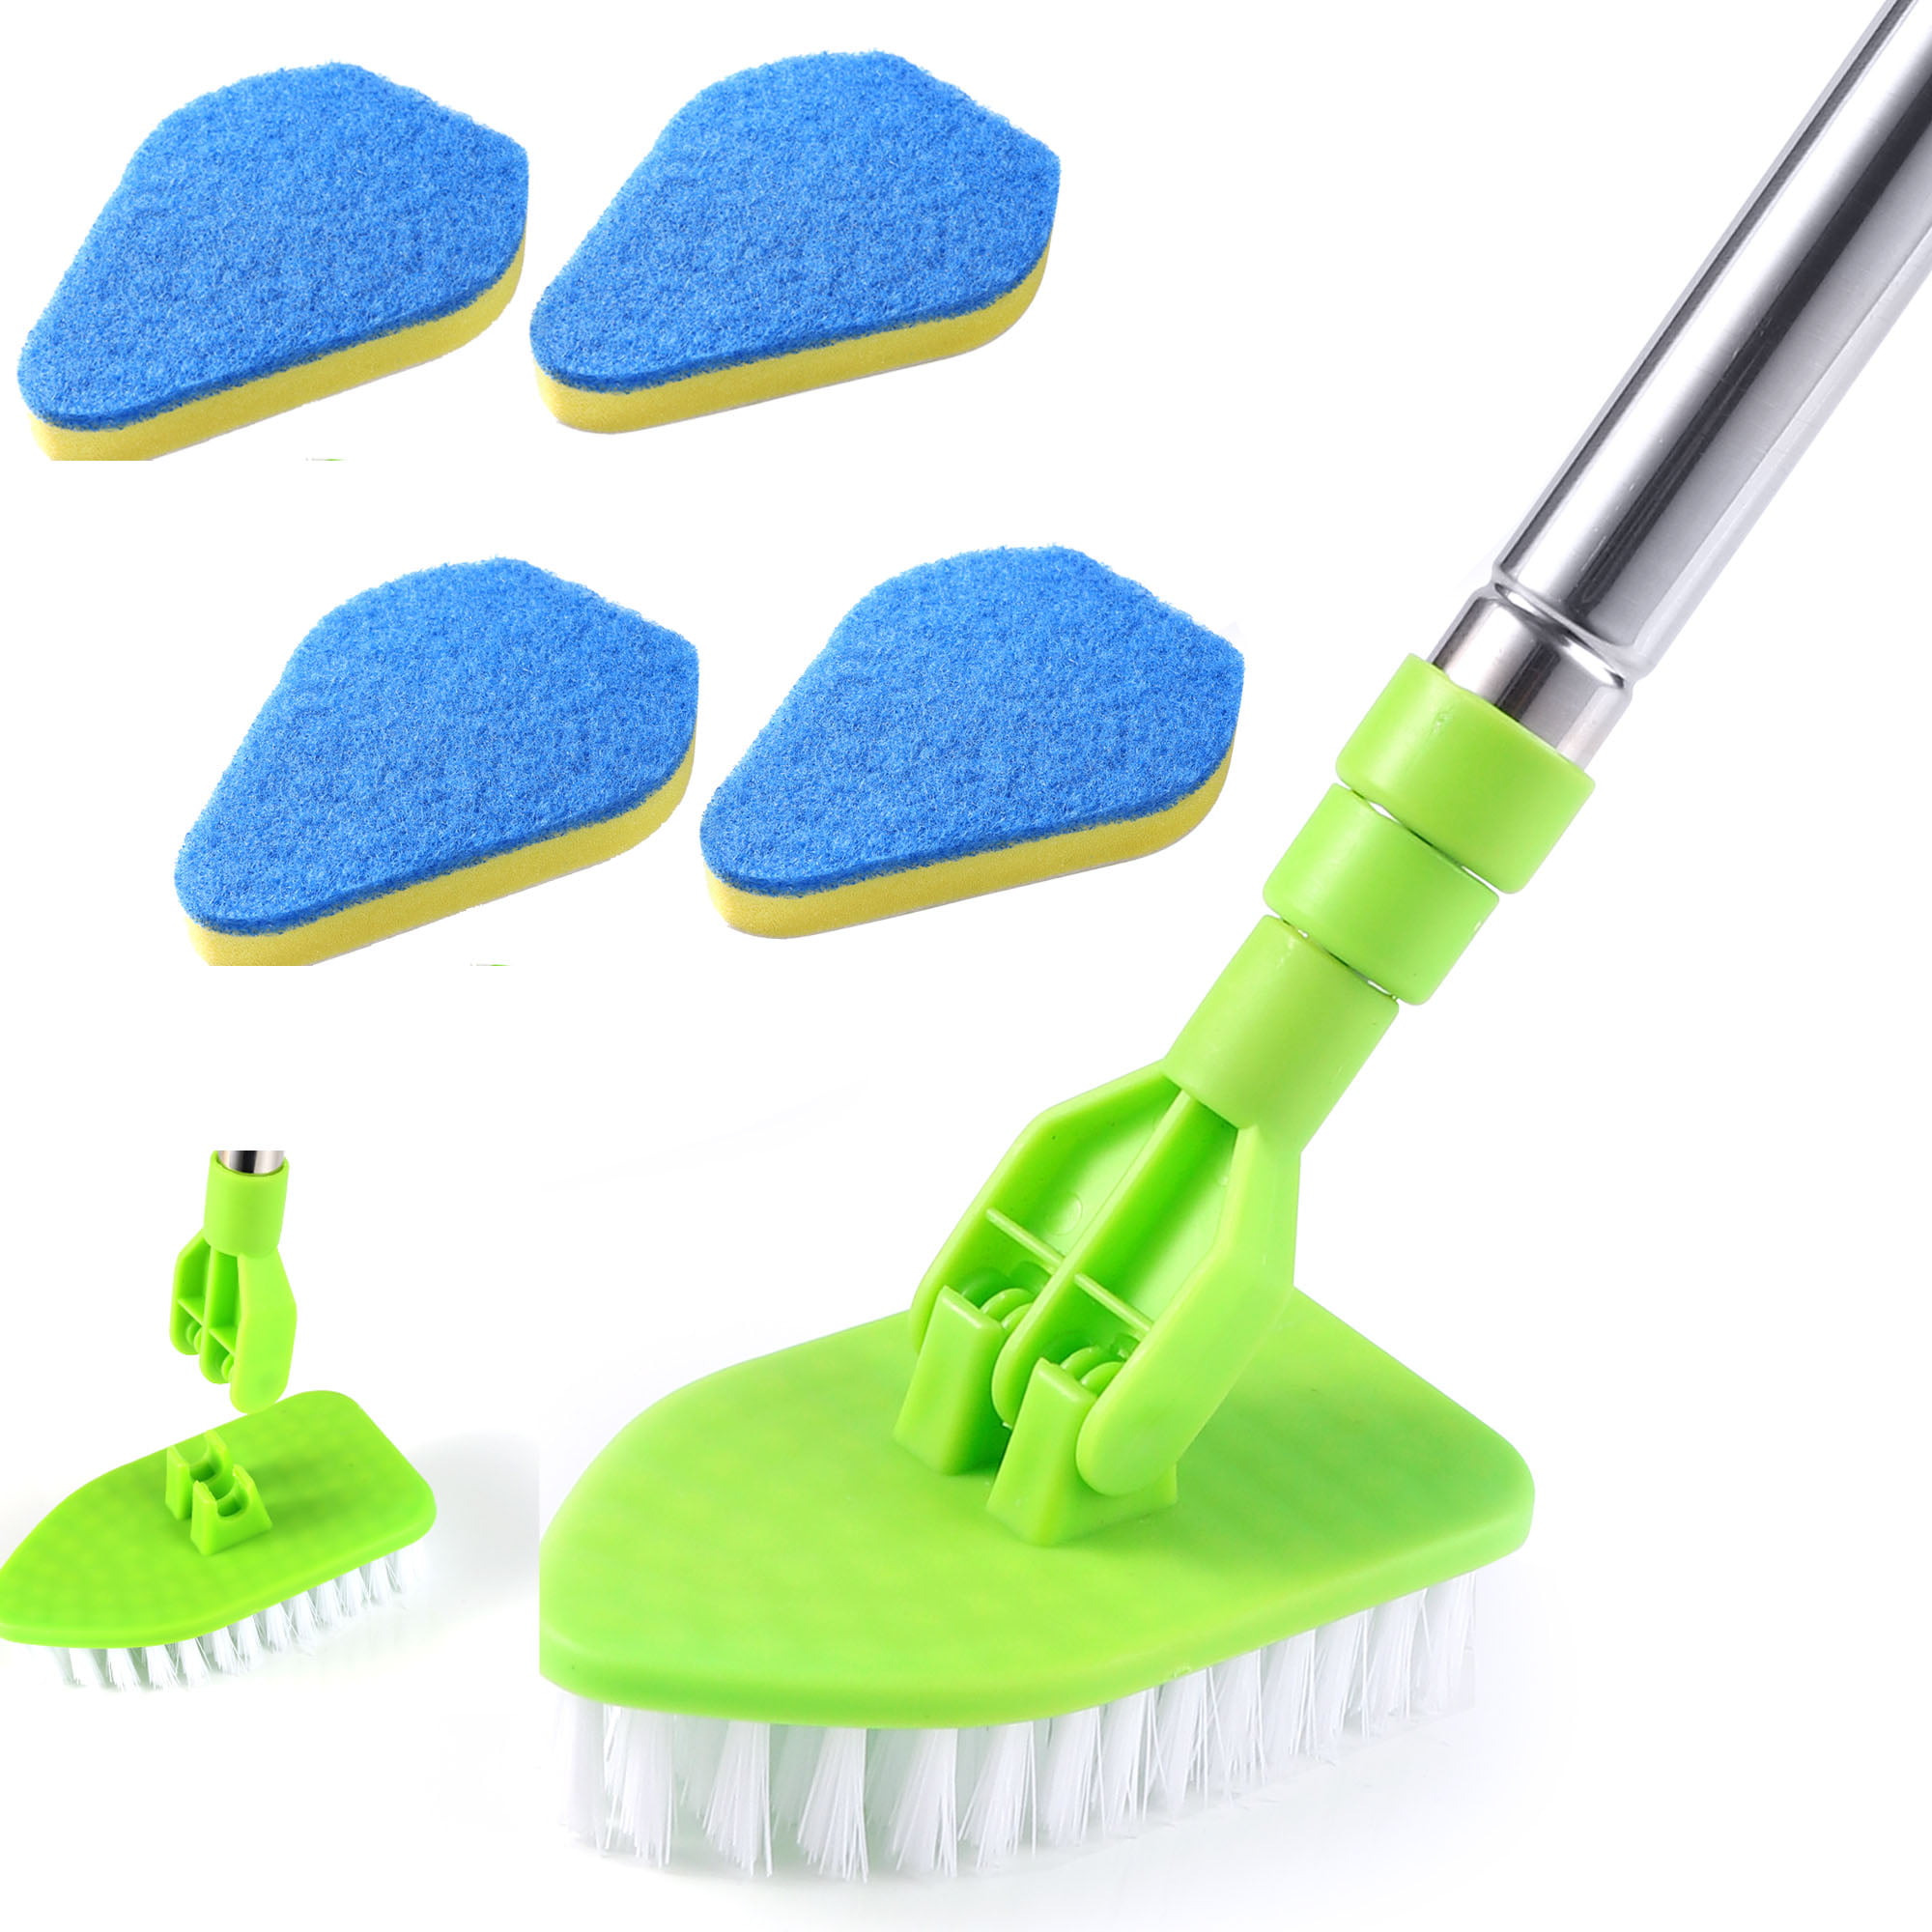 Bathroom Tile Cleaner Telescopic Shower Mop Extendable Bath Cleaning Scrubber 